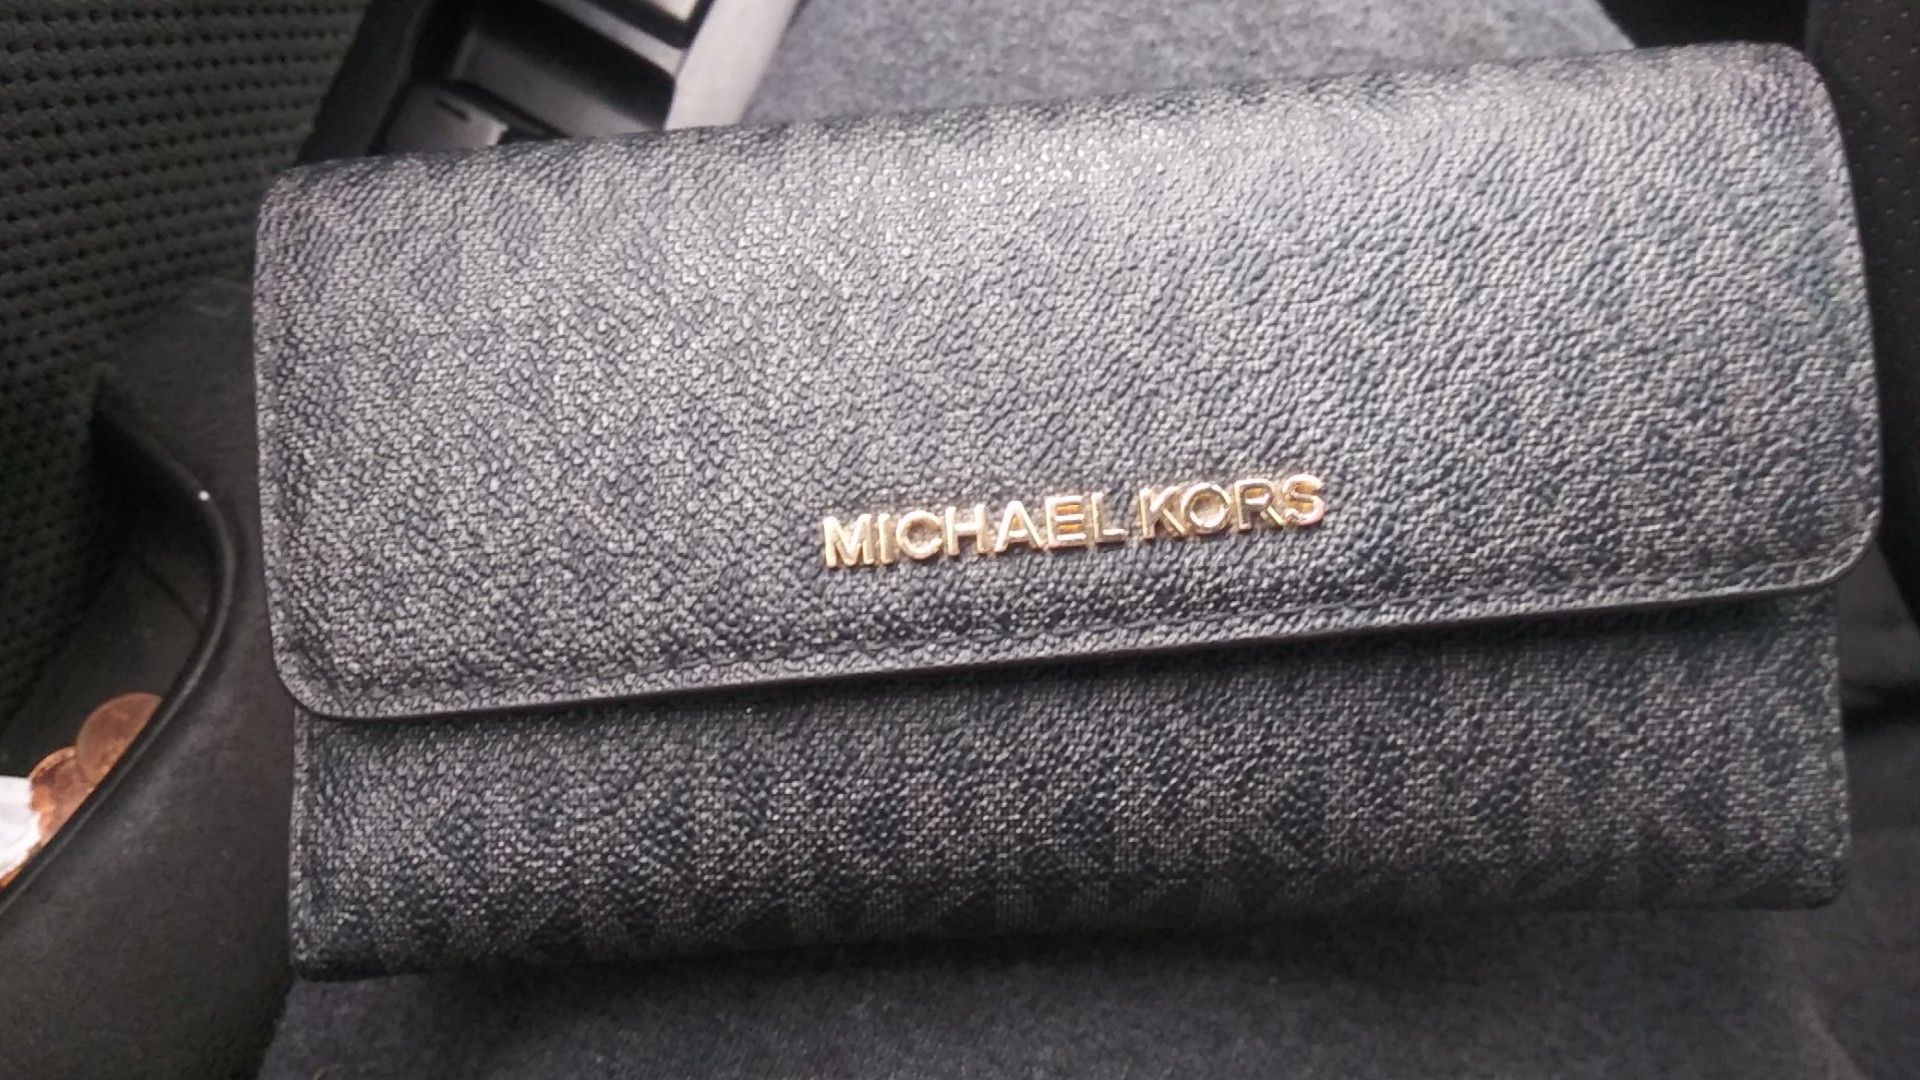 Real MICHAEL KORS wallet for woman